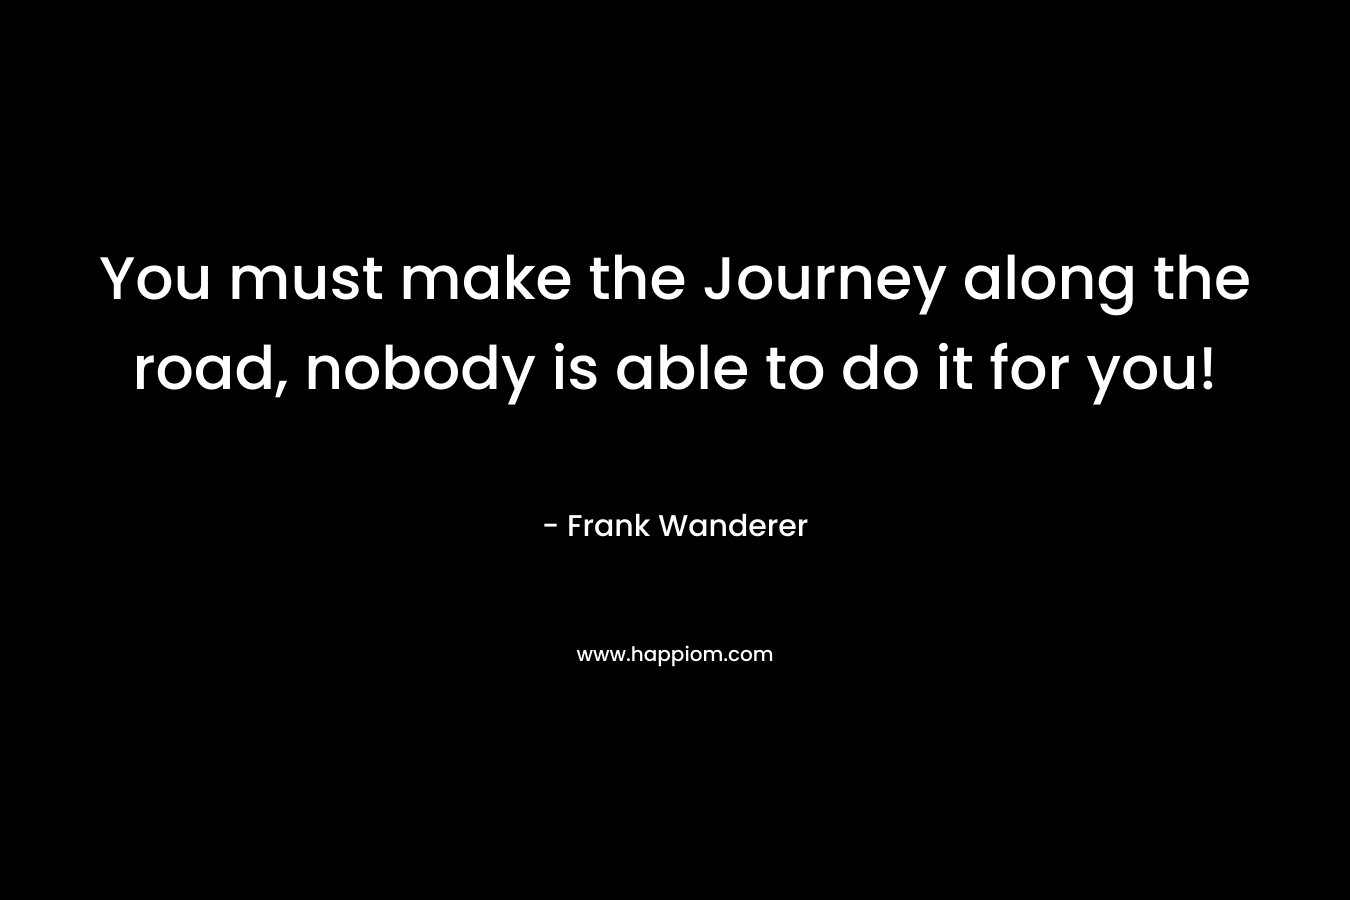 You must make the Journey along the road, nobody is able to do it for you! – Frank Wanderer